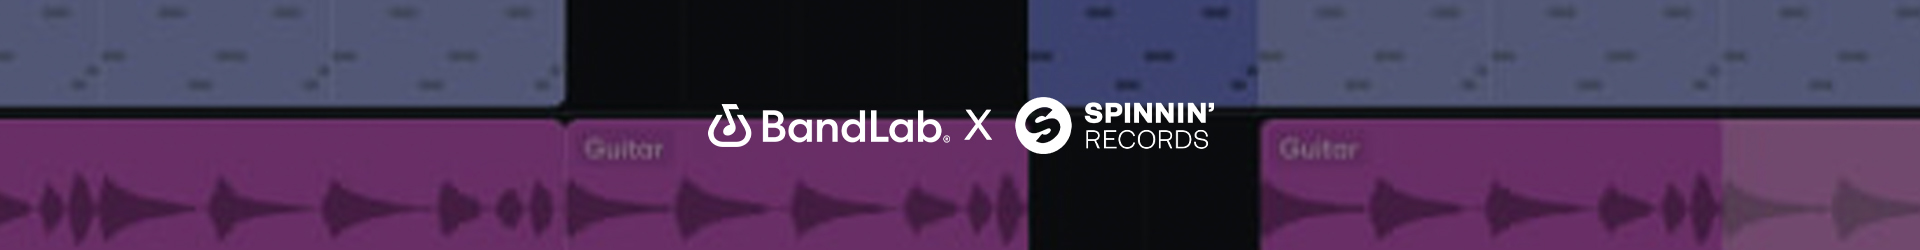 GET CREATIVE AND IMPROVE YOUR DEMOS WITH BANDLAB!